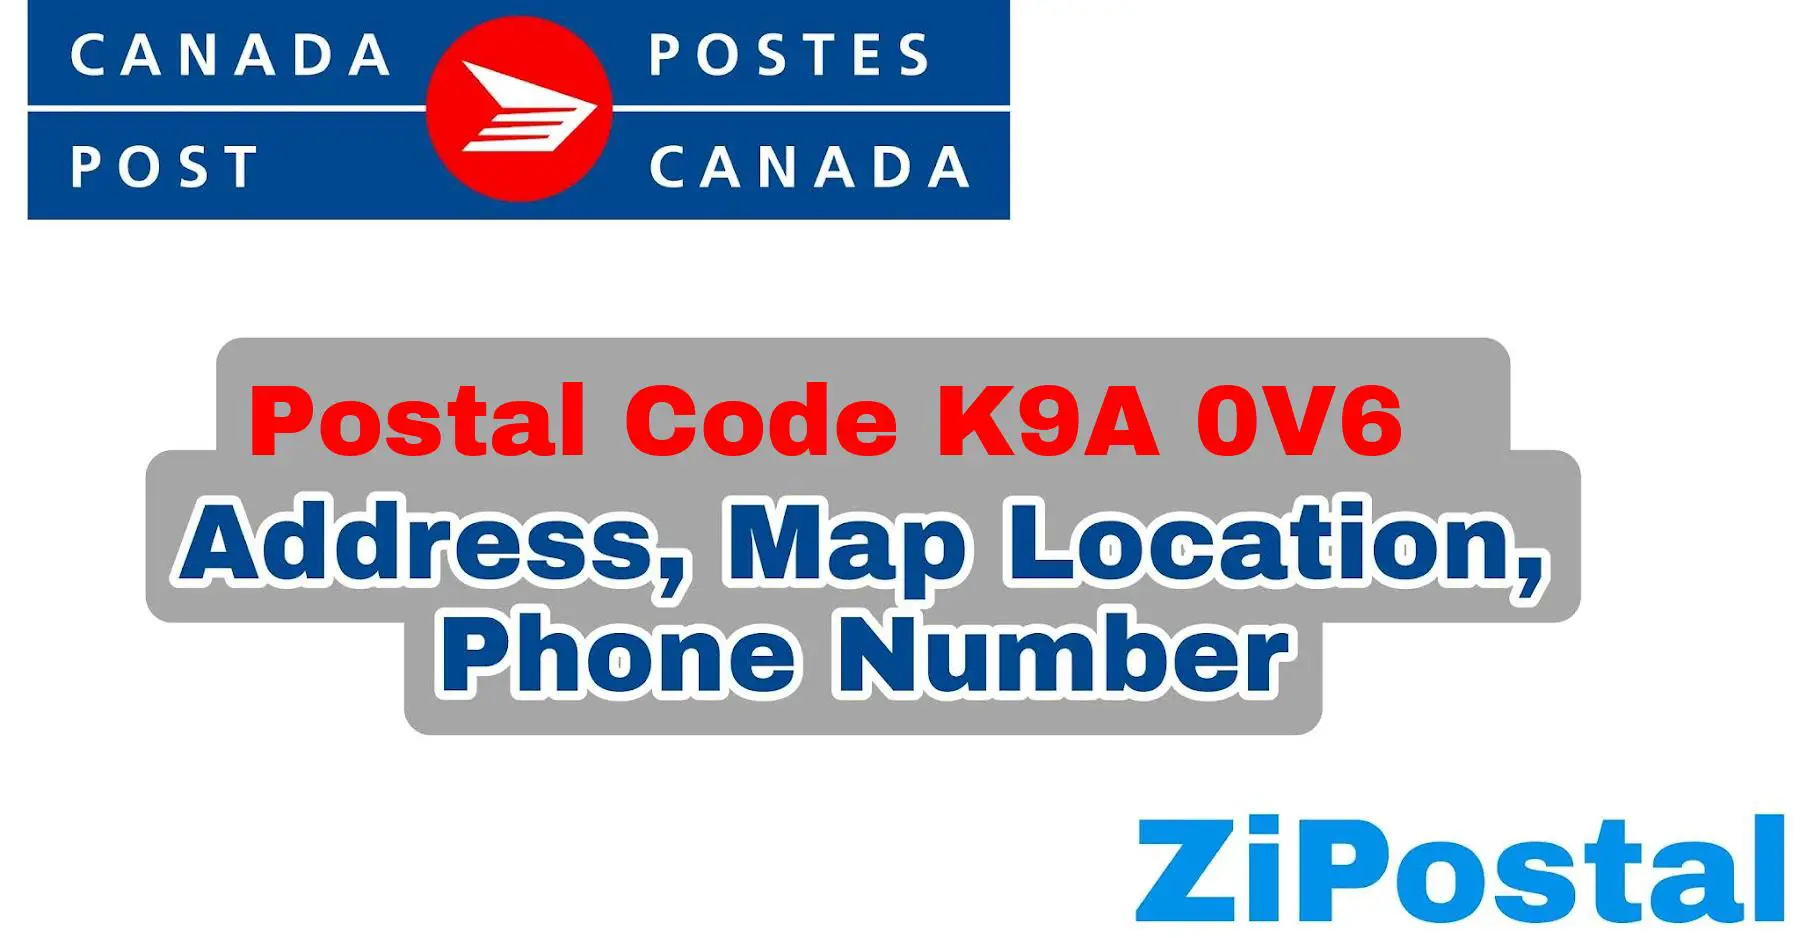 Postal Code K9A 0V6 Address Map Location and Phone Number